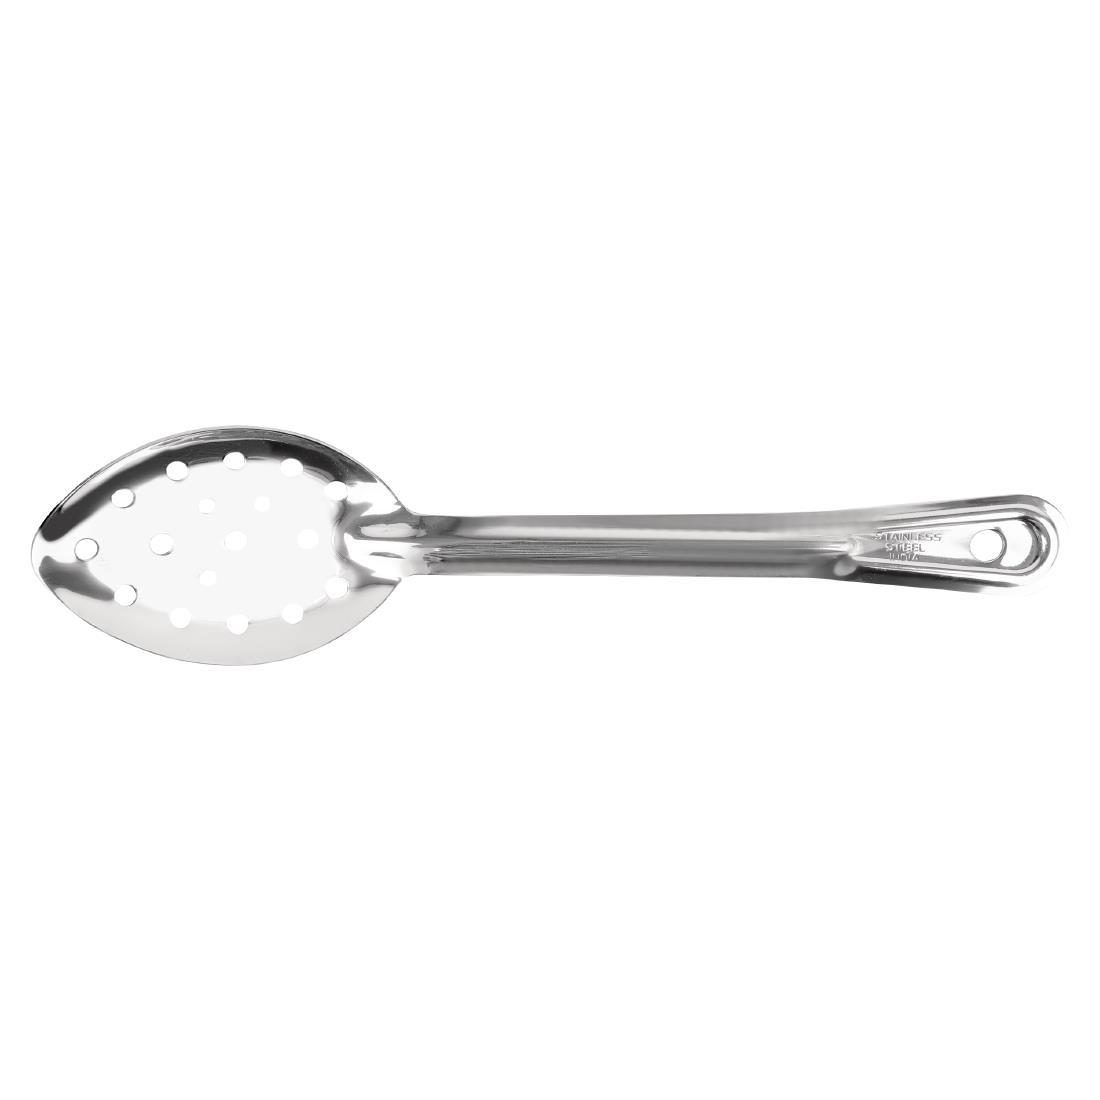 Vogue Perforated Serving Spoon 11" - J631  - 3